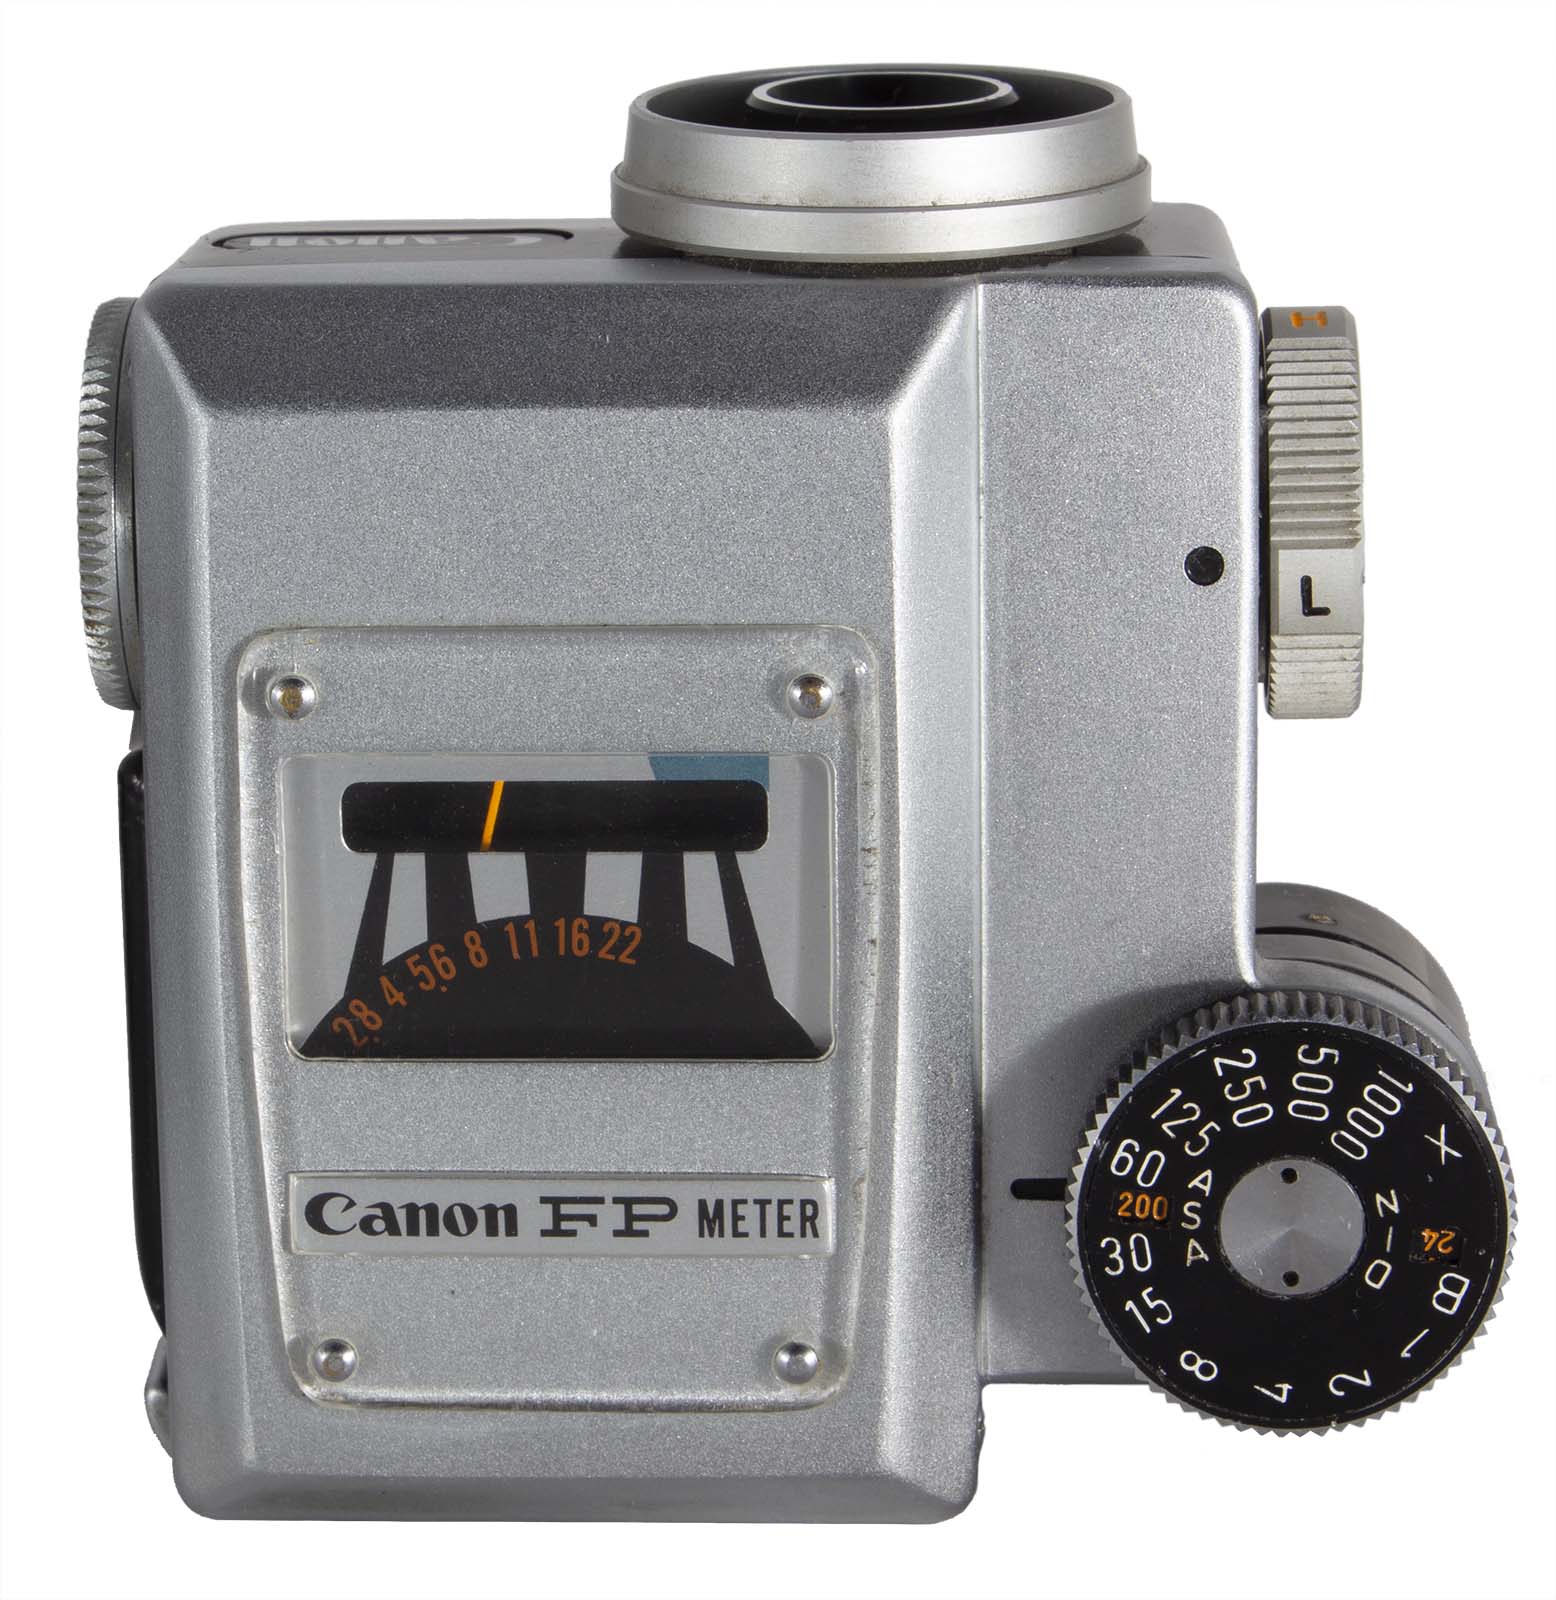 Canon FP Meter